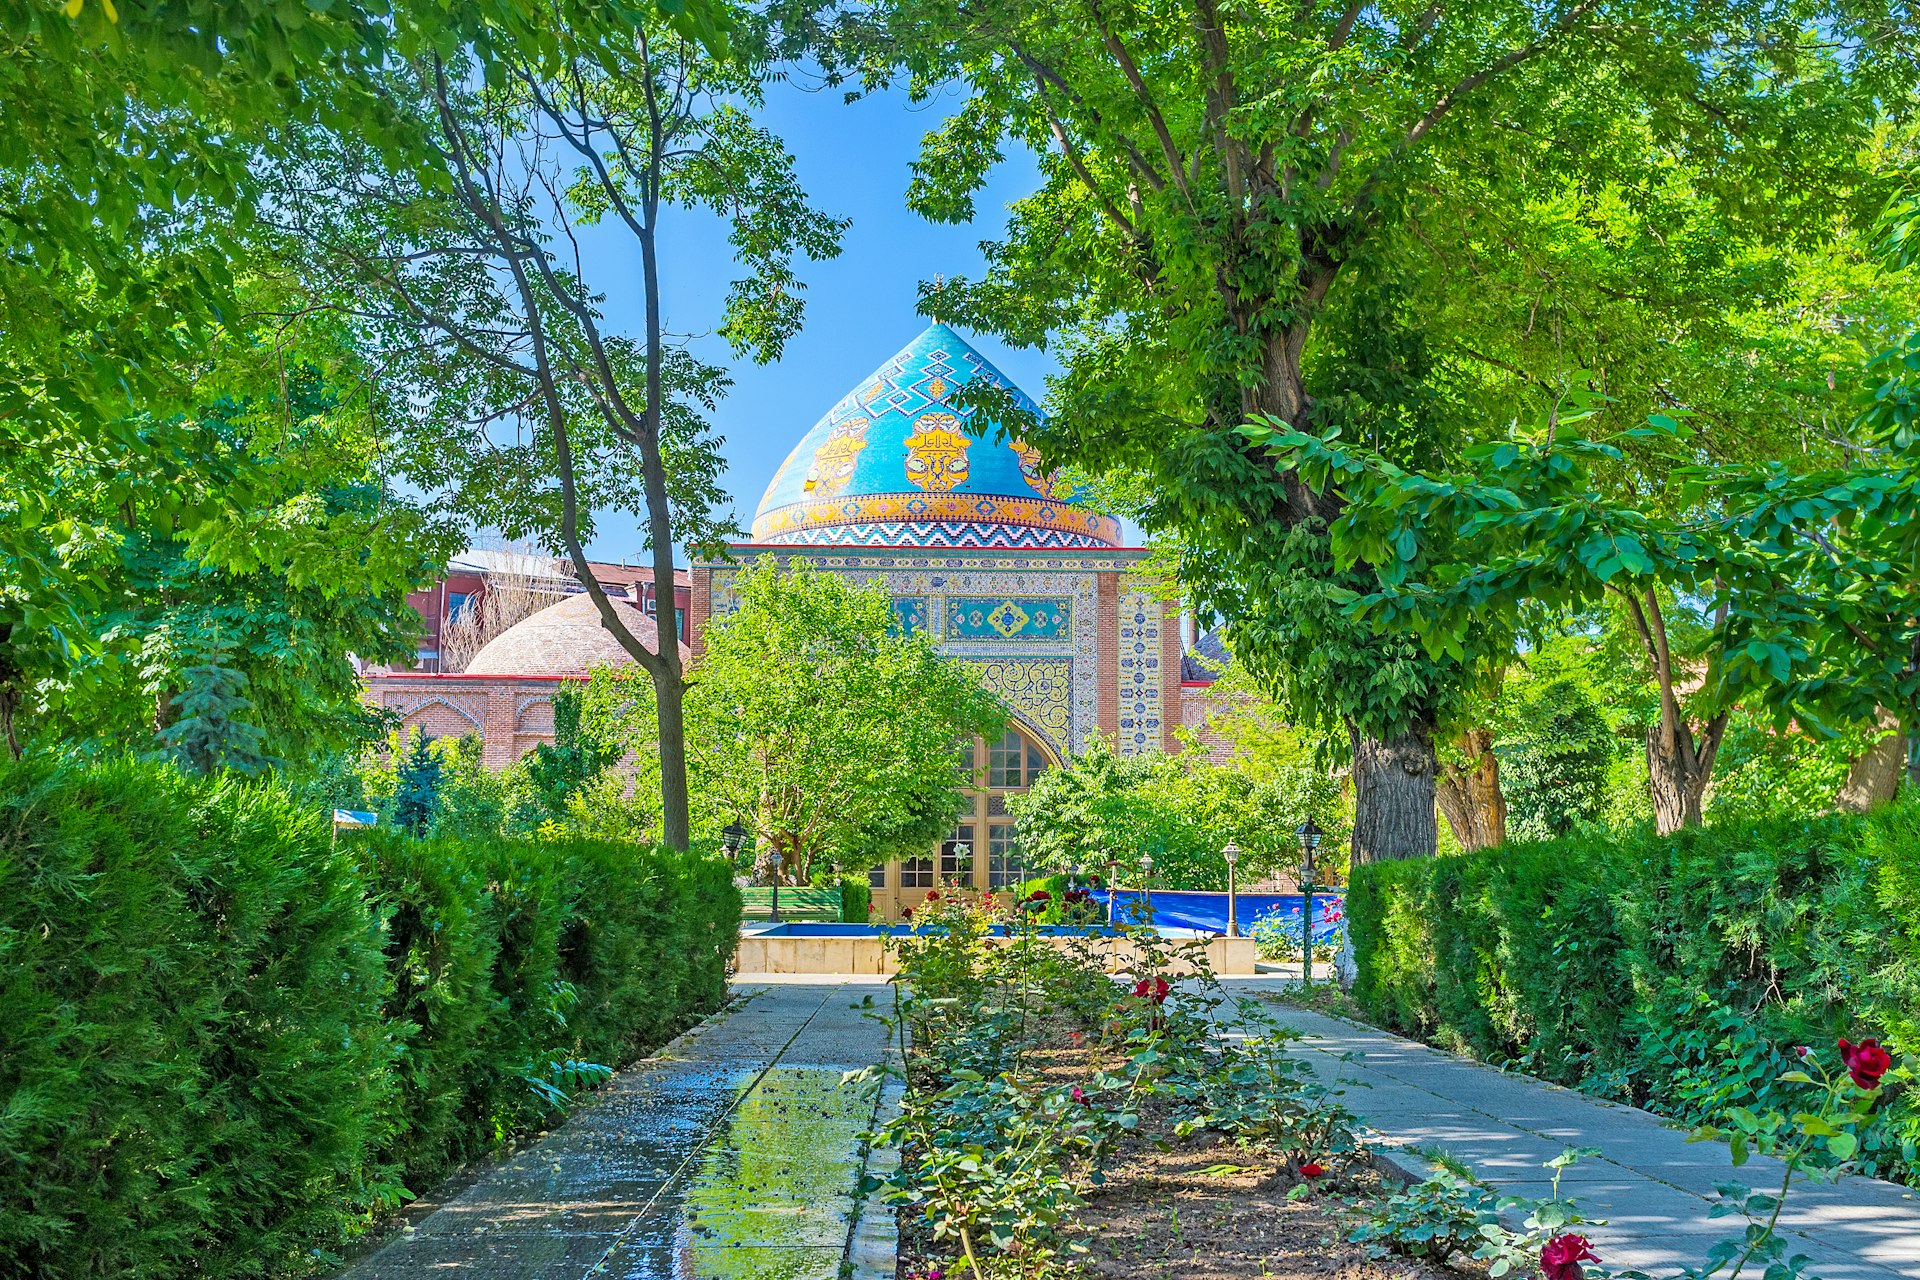 Yerevan's Blue Mosque, the only active mosque in Armenia